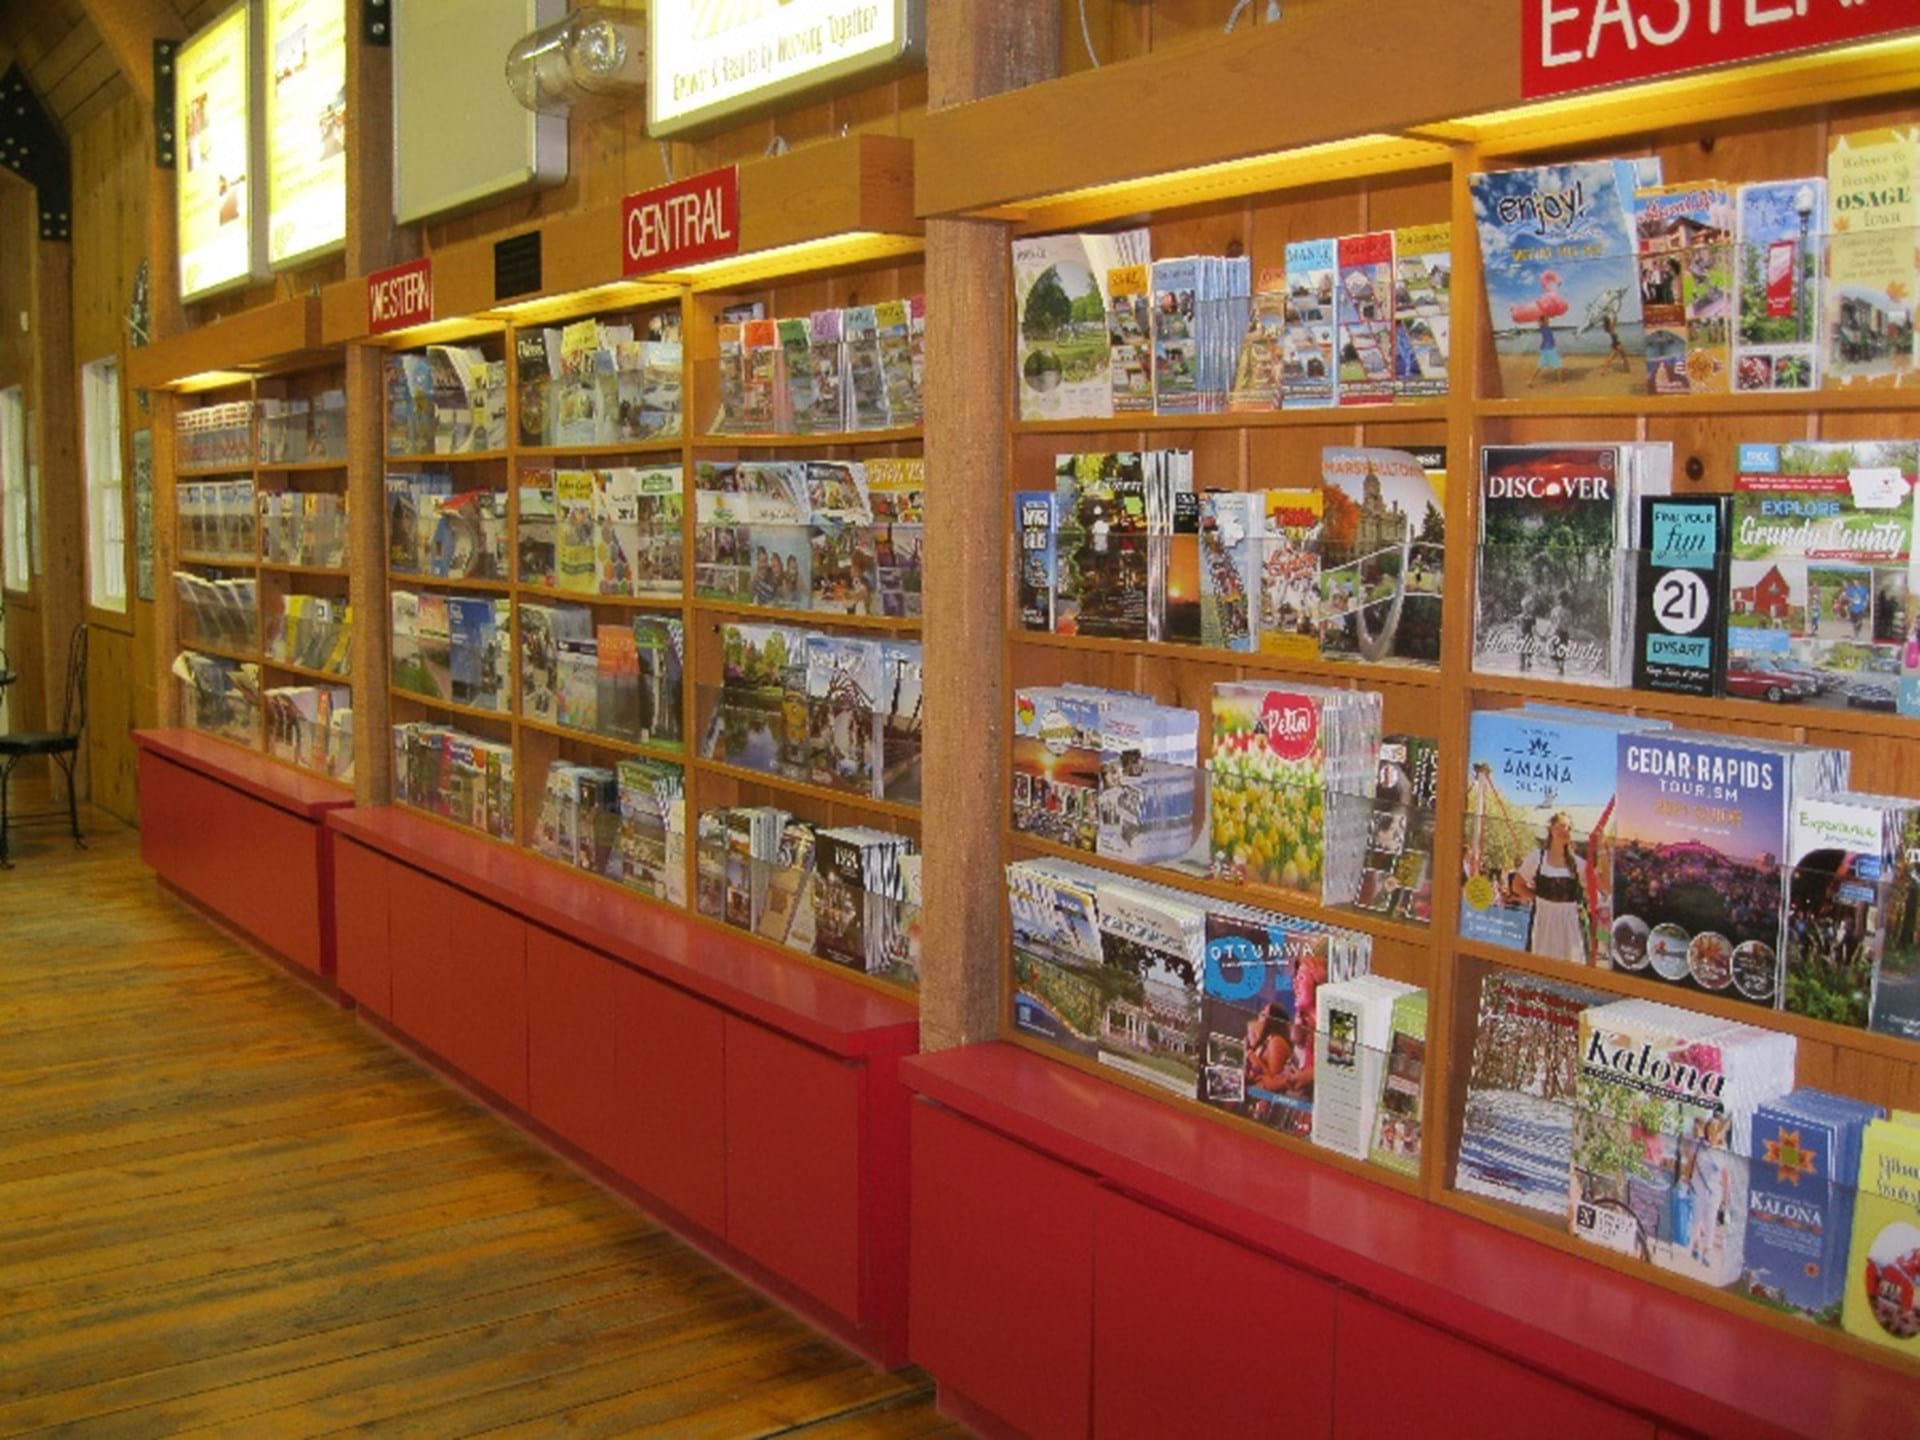 Travel guides from across the state of Iowa